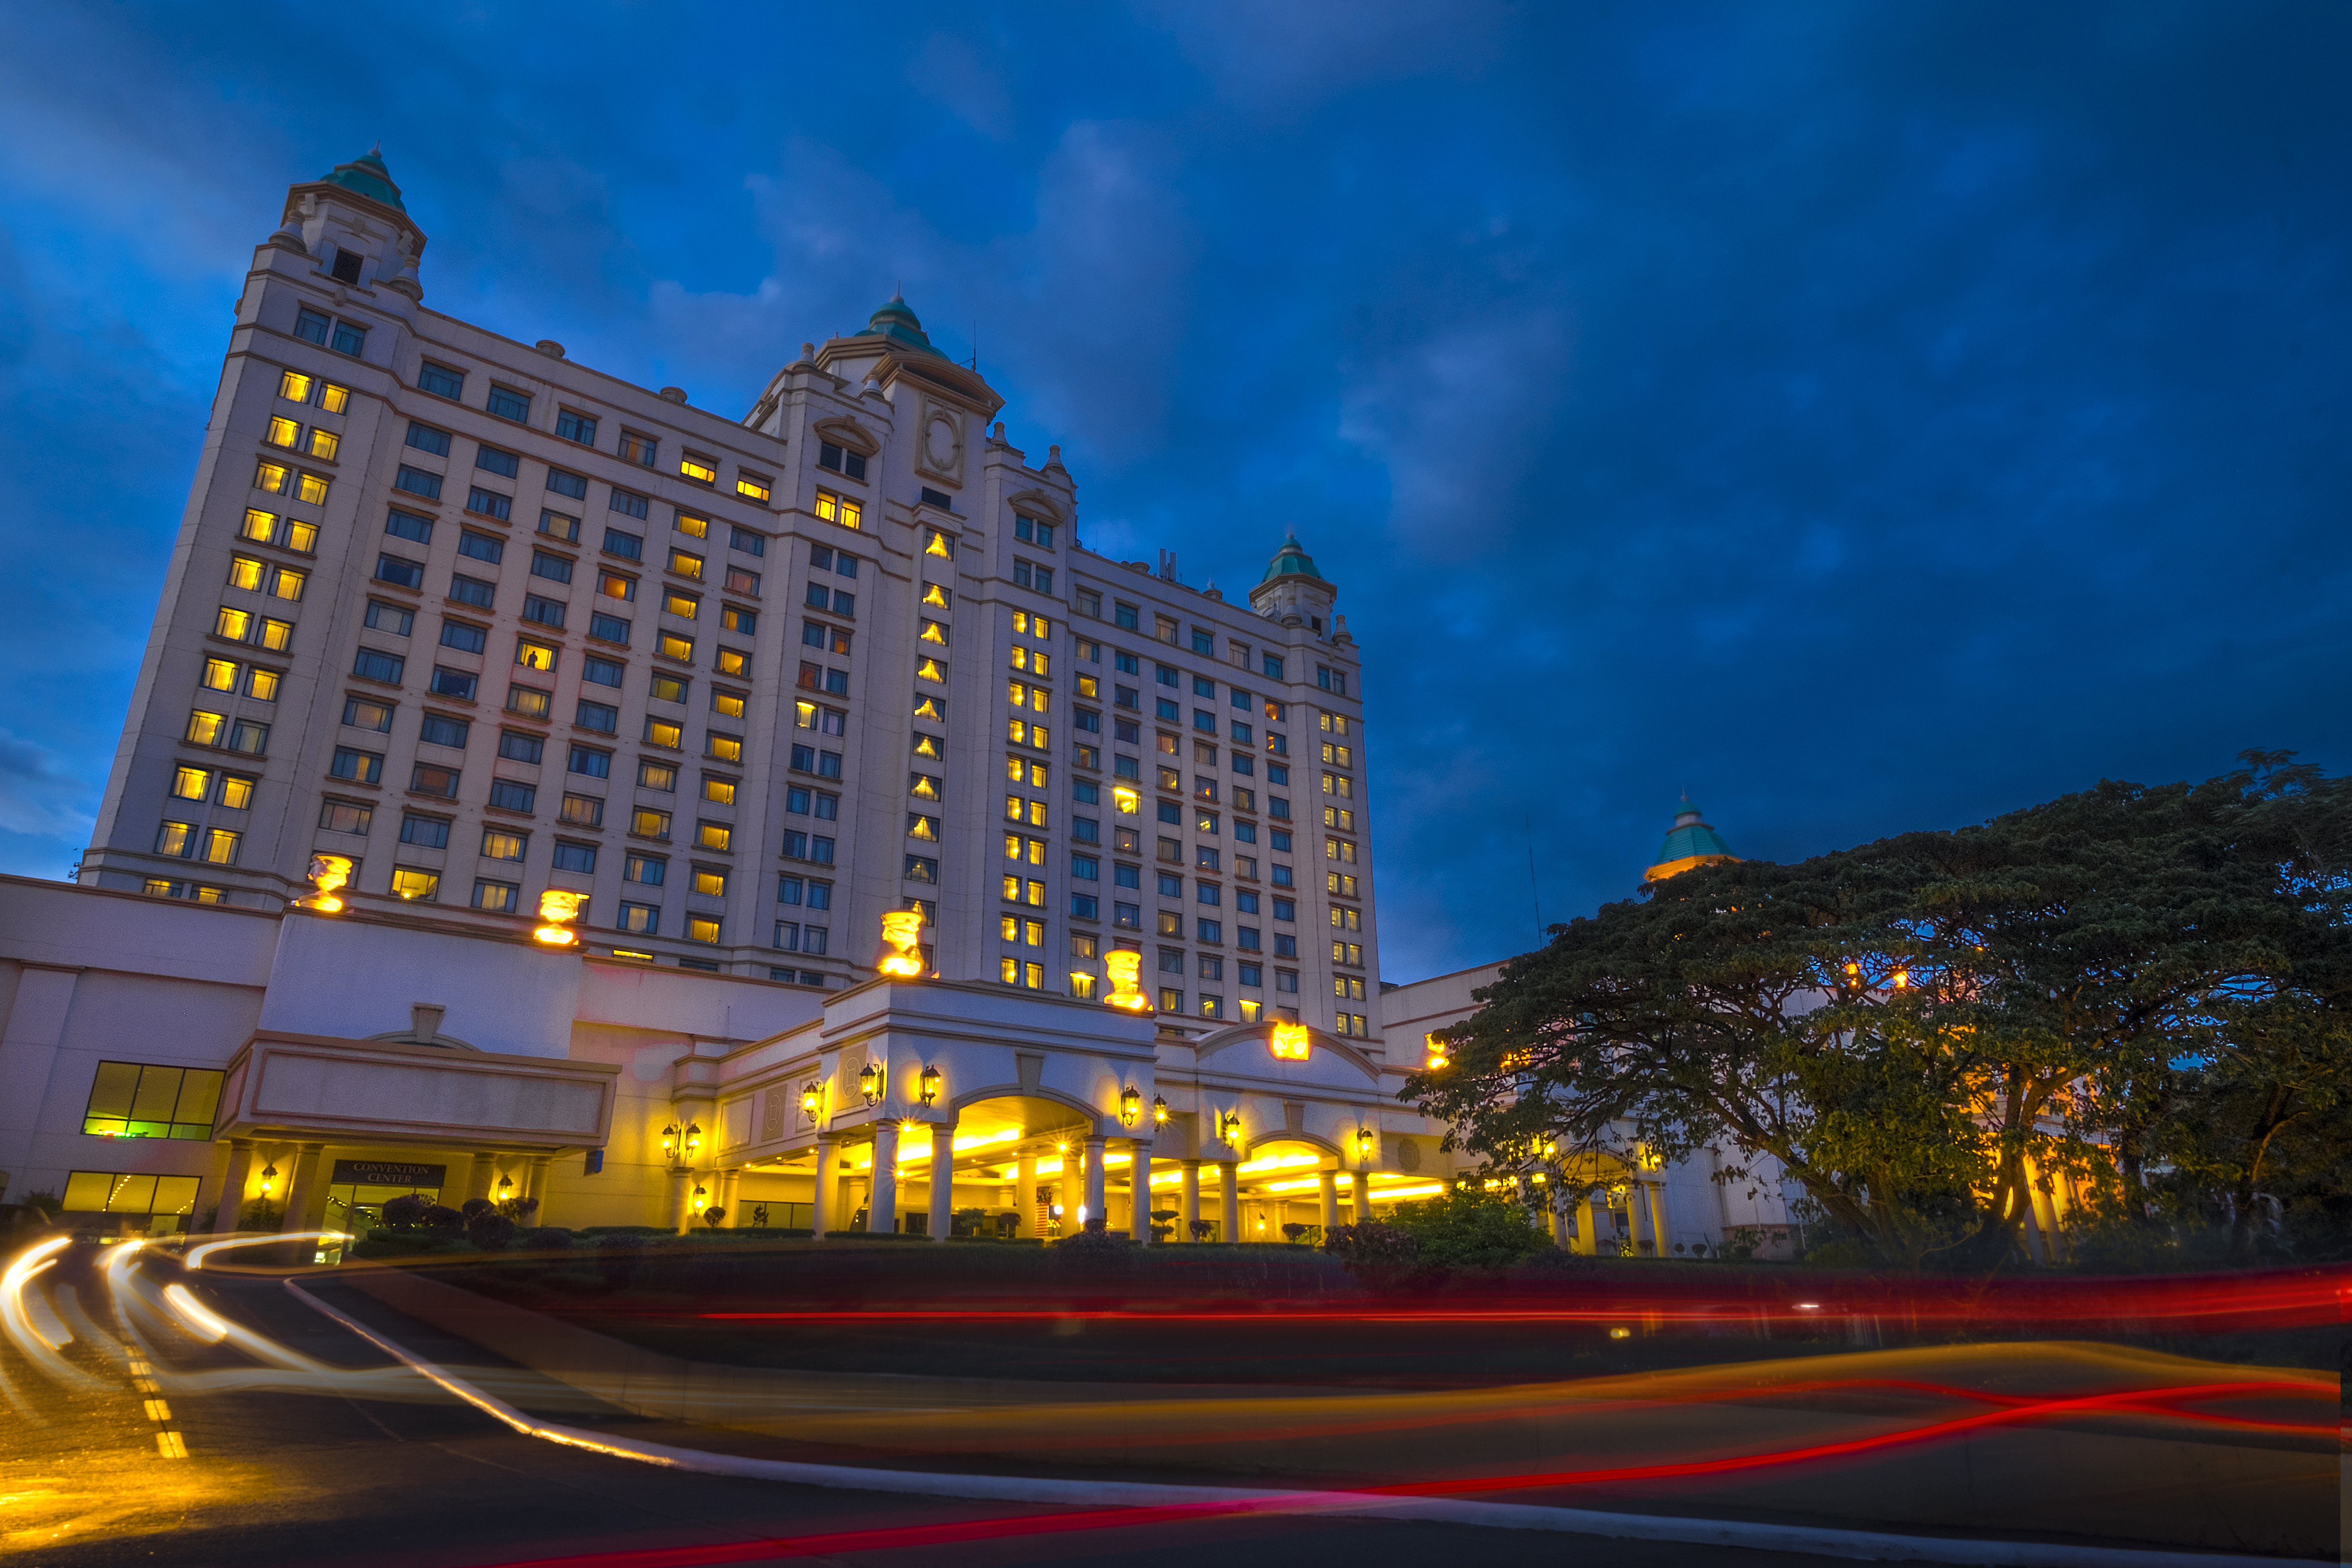 Waterfront Hotels And Casinos Hotels With A Filipino Heart Waterfront Hotels Casino